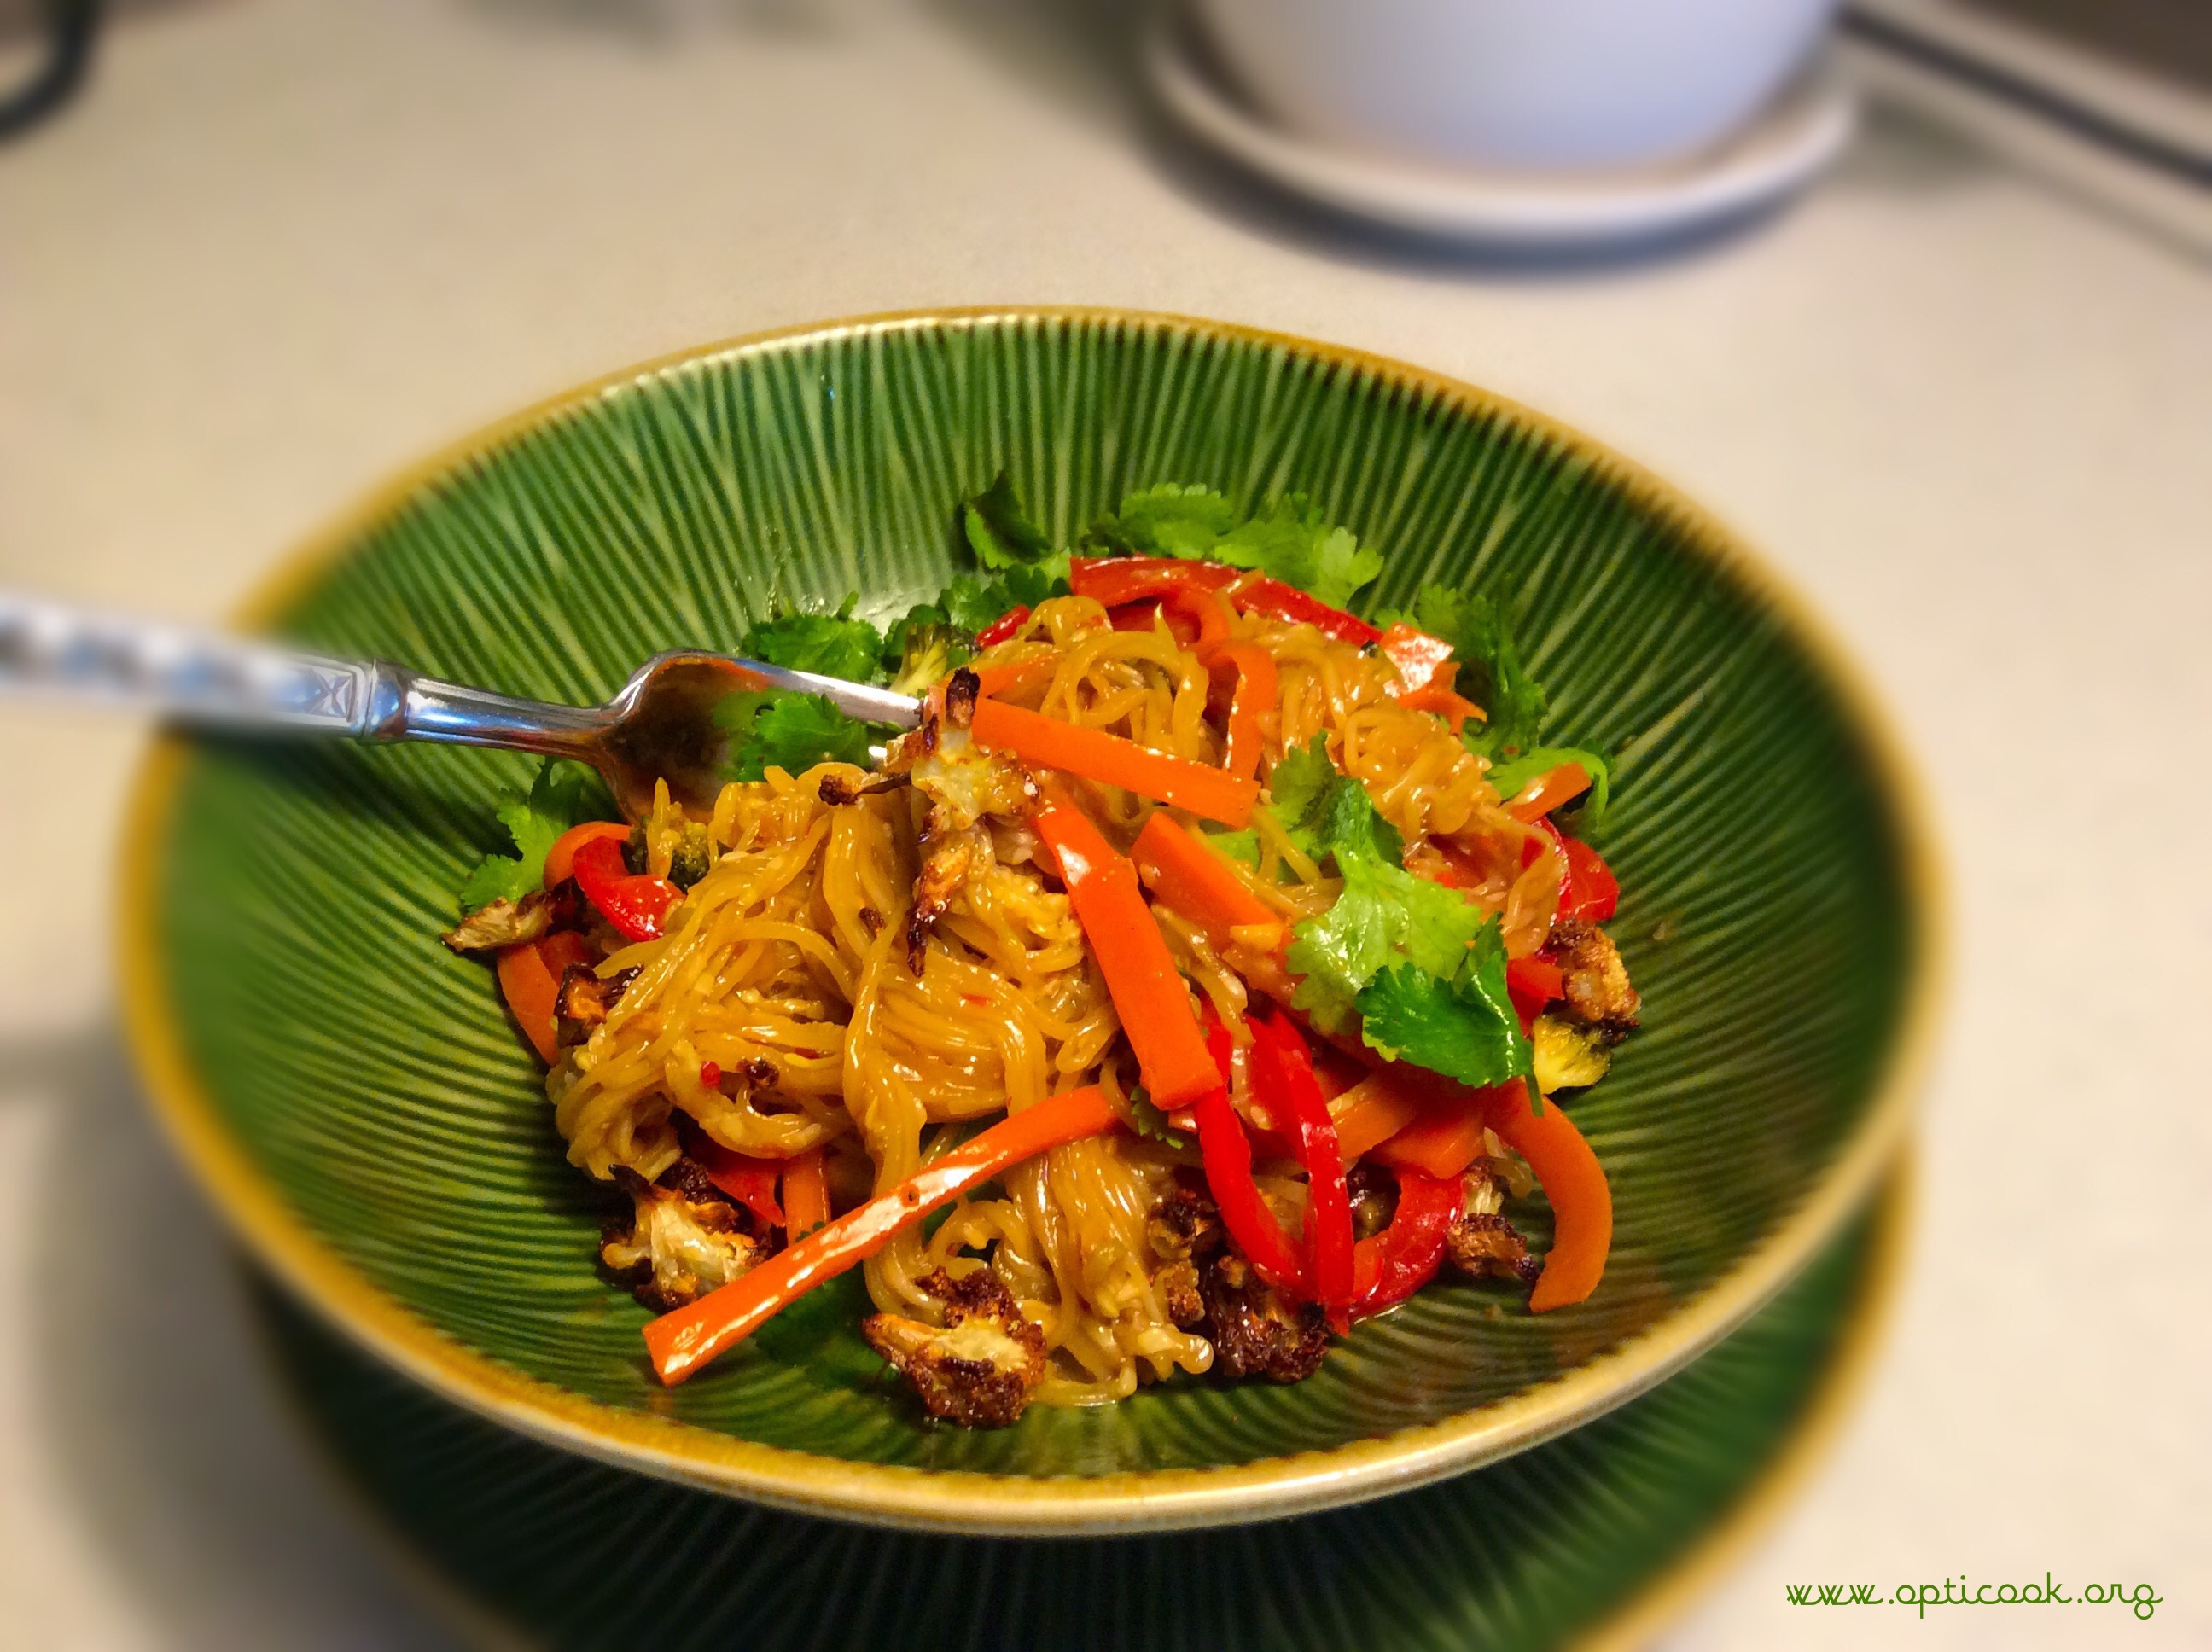 Lip smacking tasty Pad Thai for lunch today. 